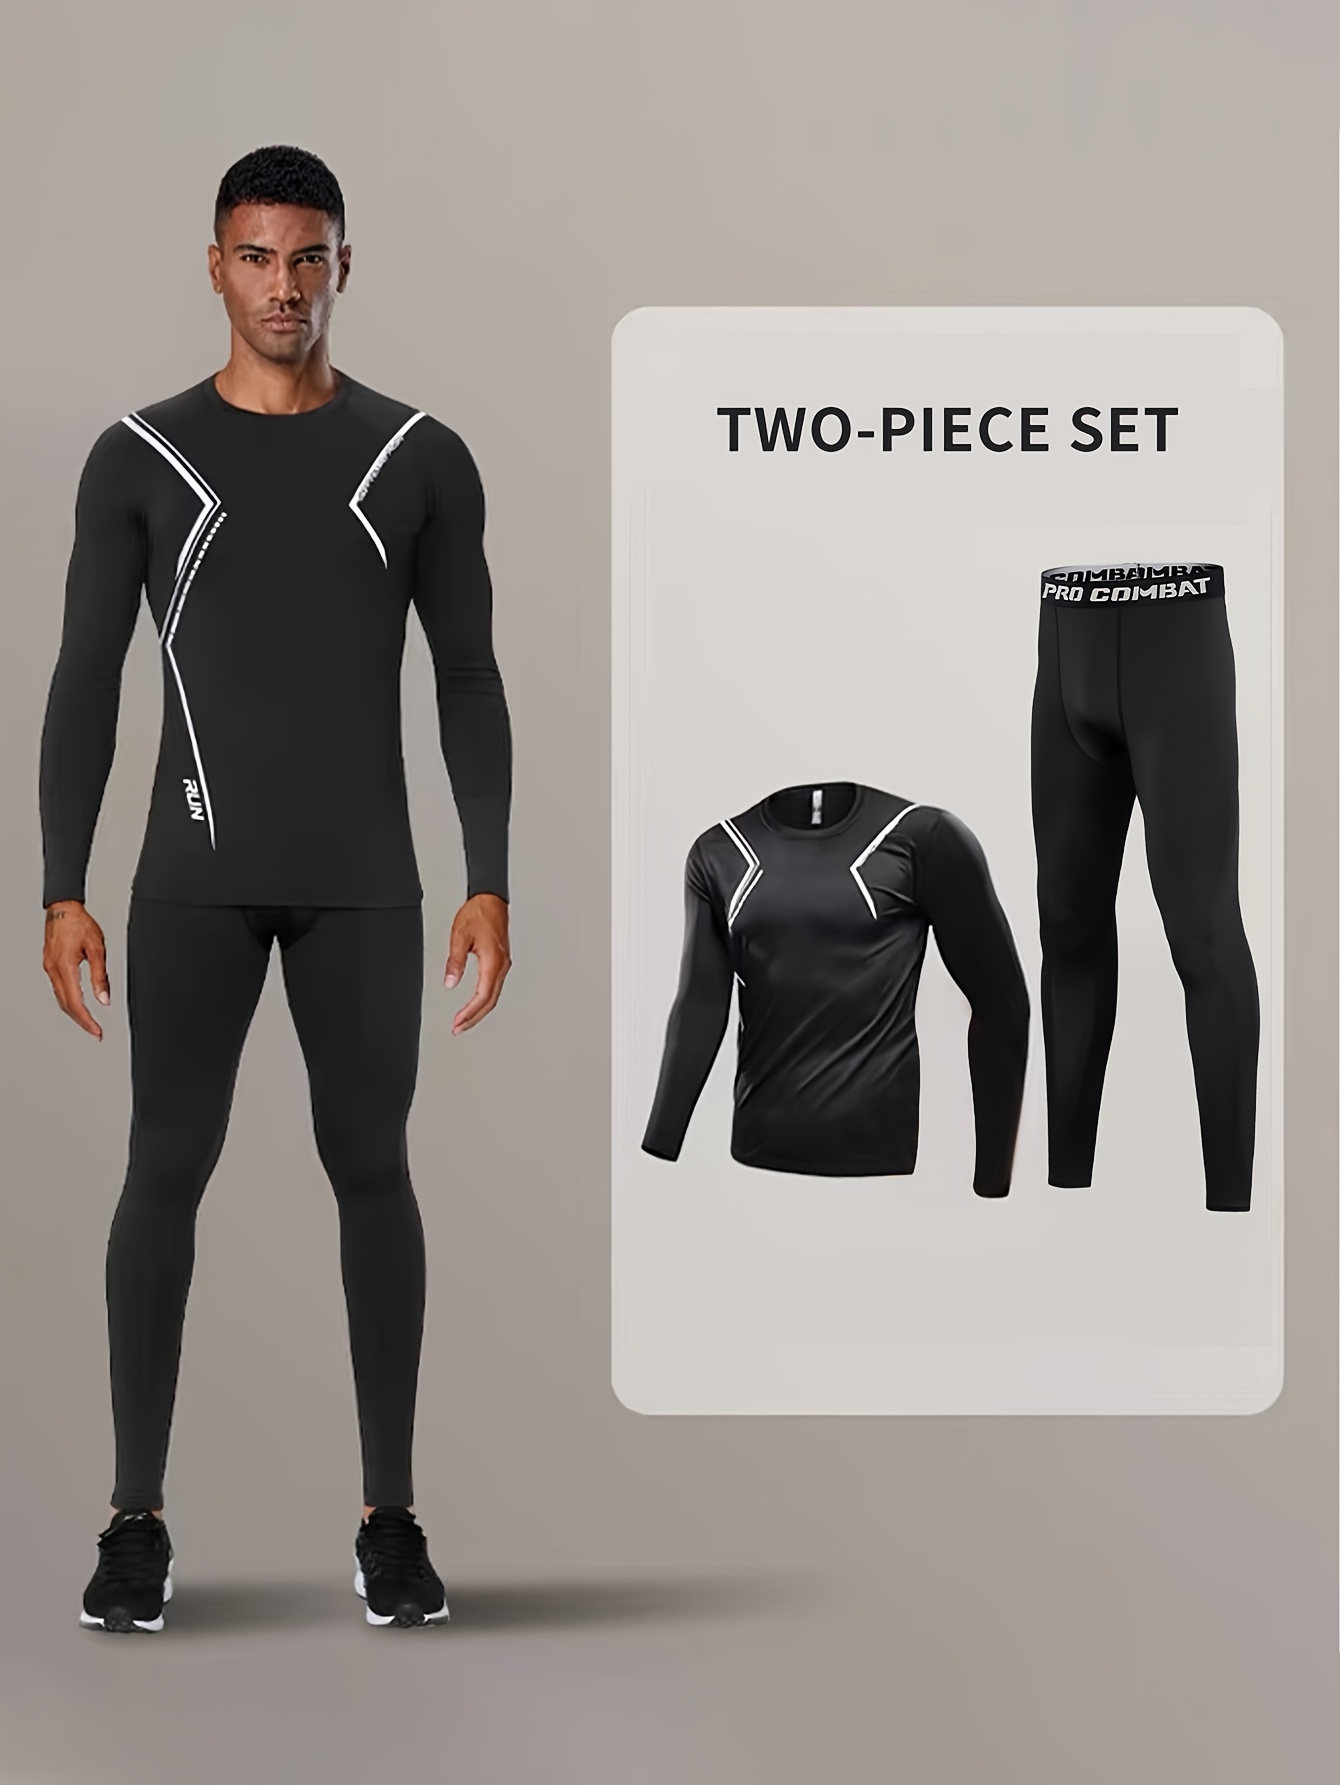 Men's Thermal Underwear Pants Compression Base Layer Thermal